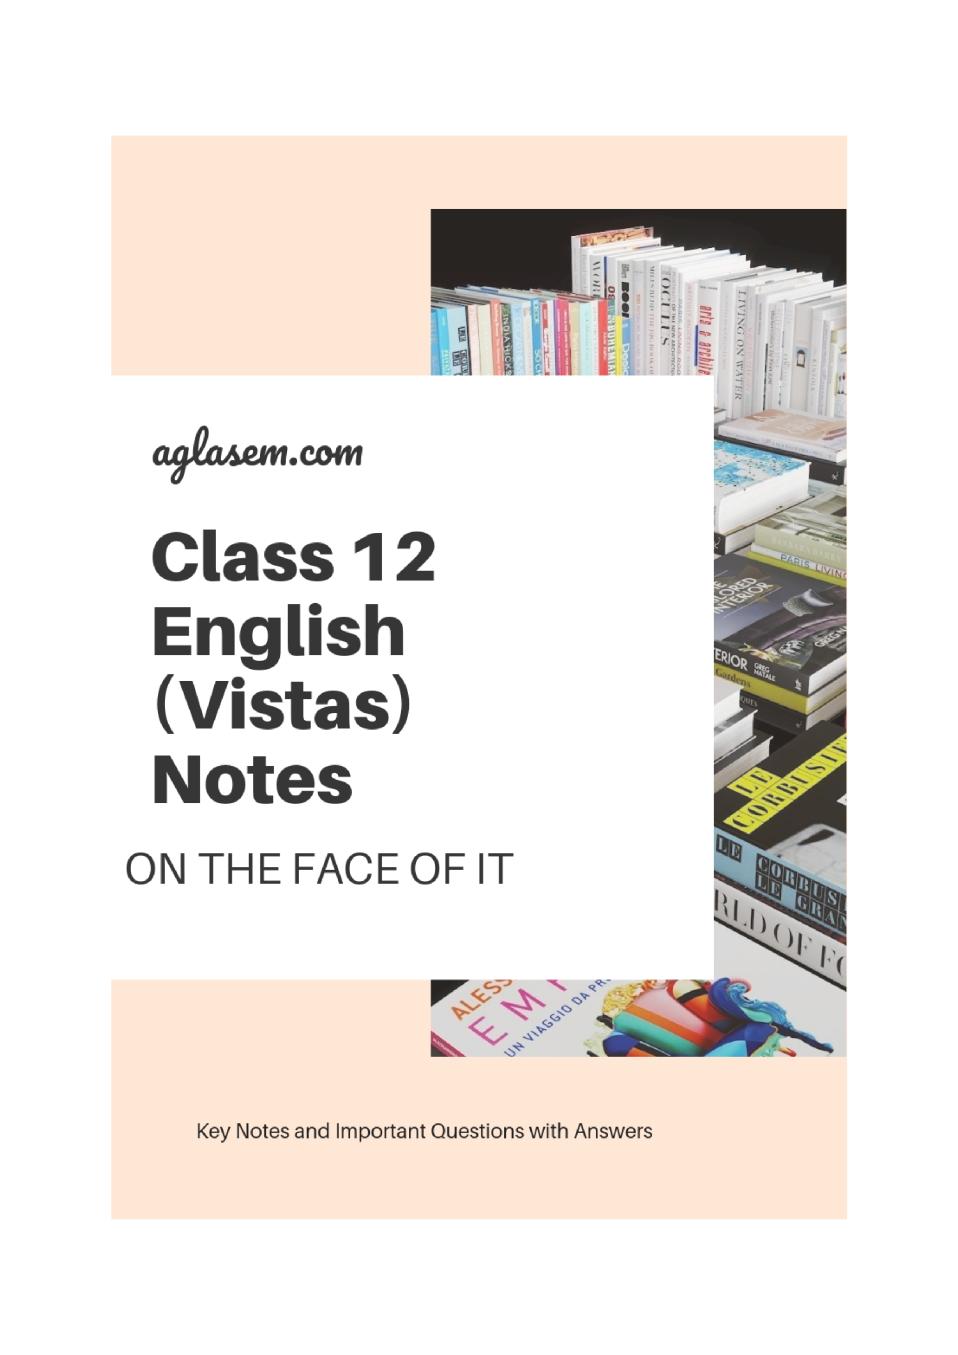 Class 12 English Vistas Notes For On the Face of it - Page 1